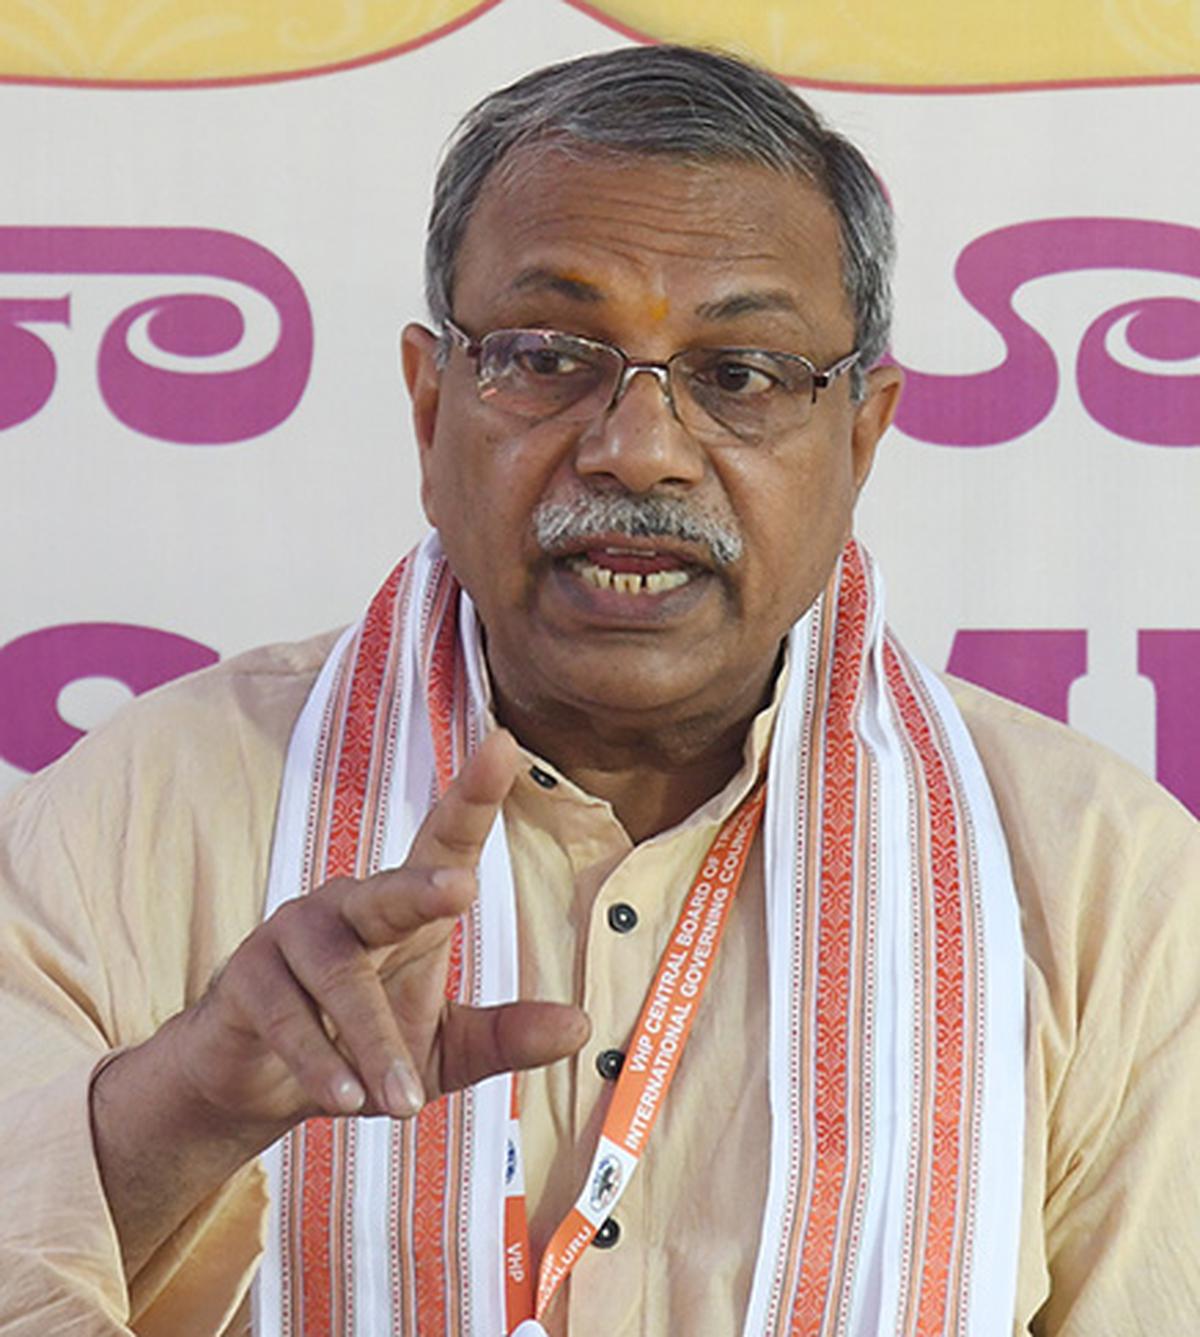 Demand of reservation for the converts is anti-constitutional and anti-national: VHP